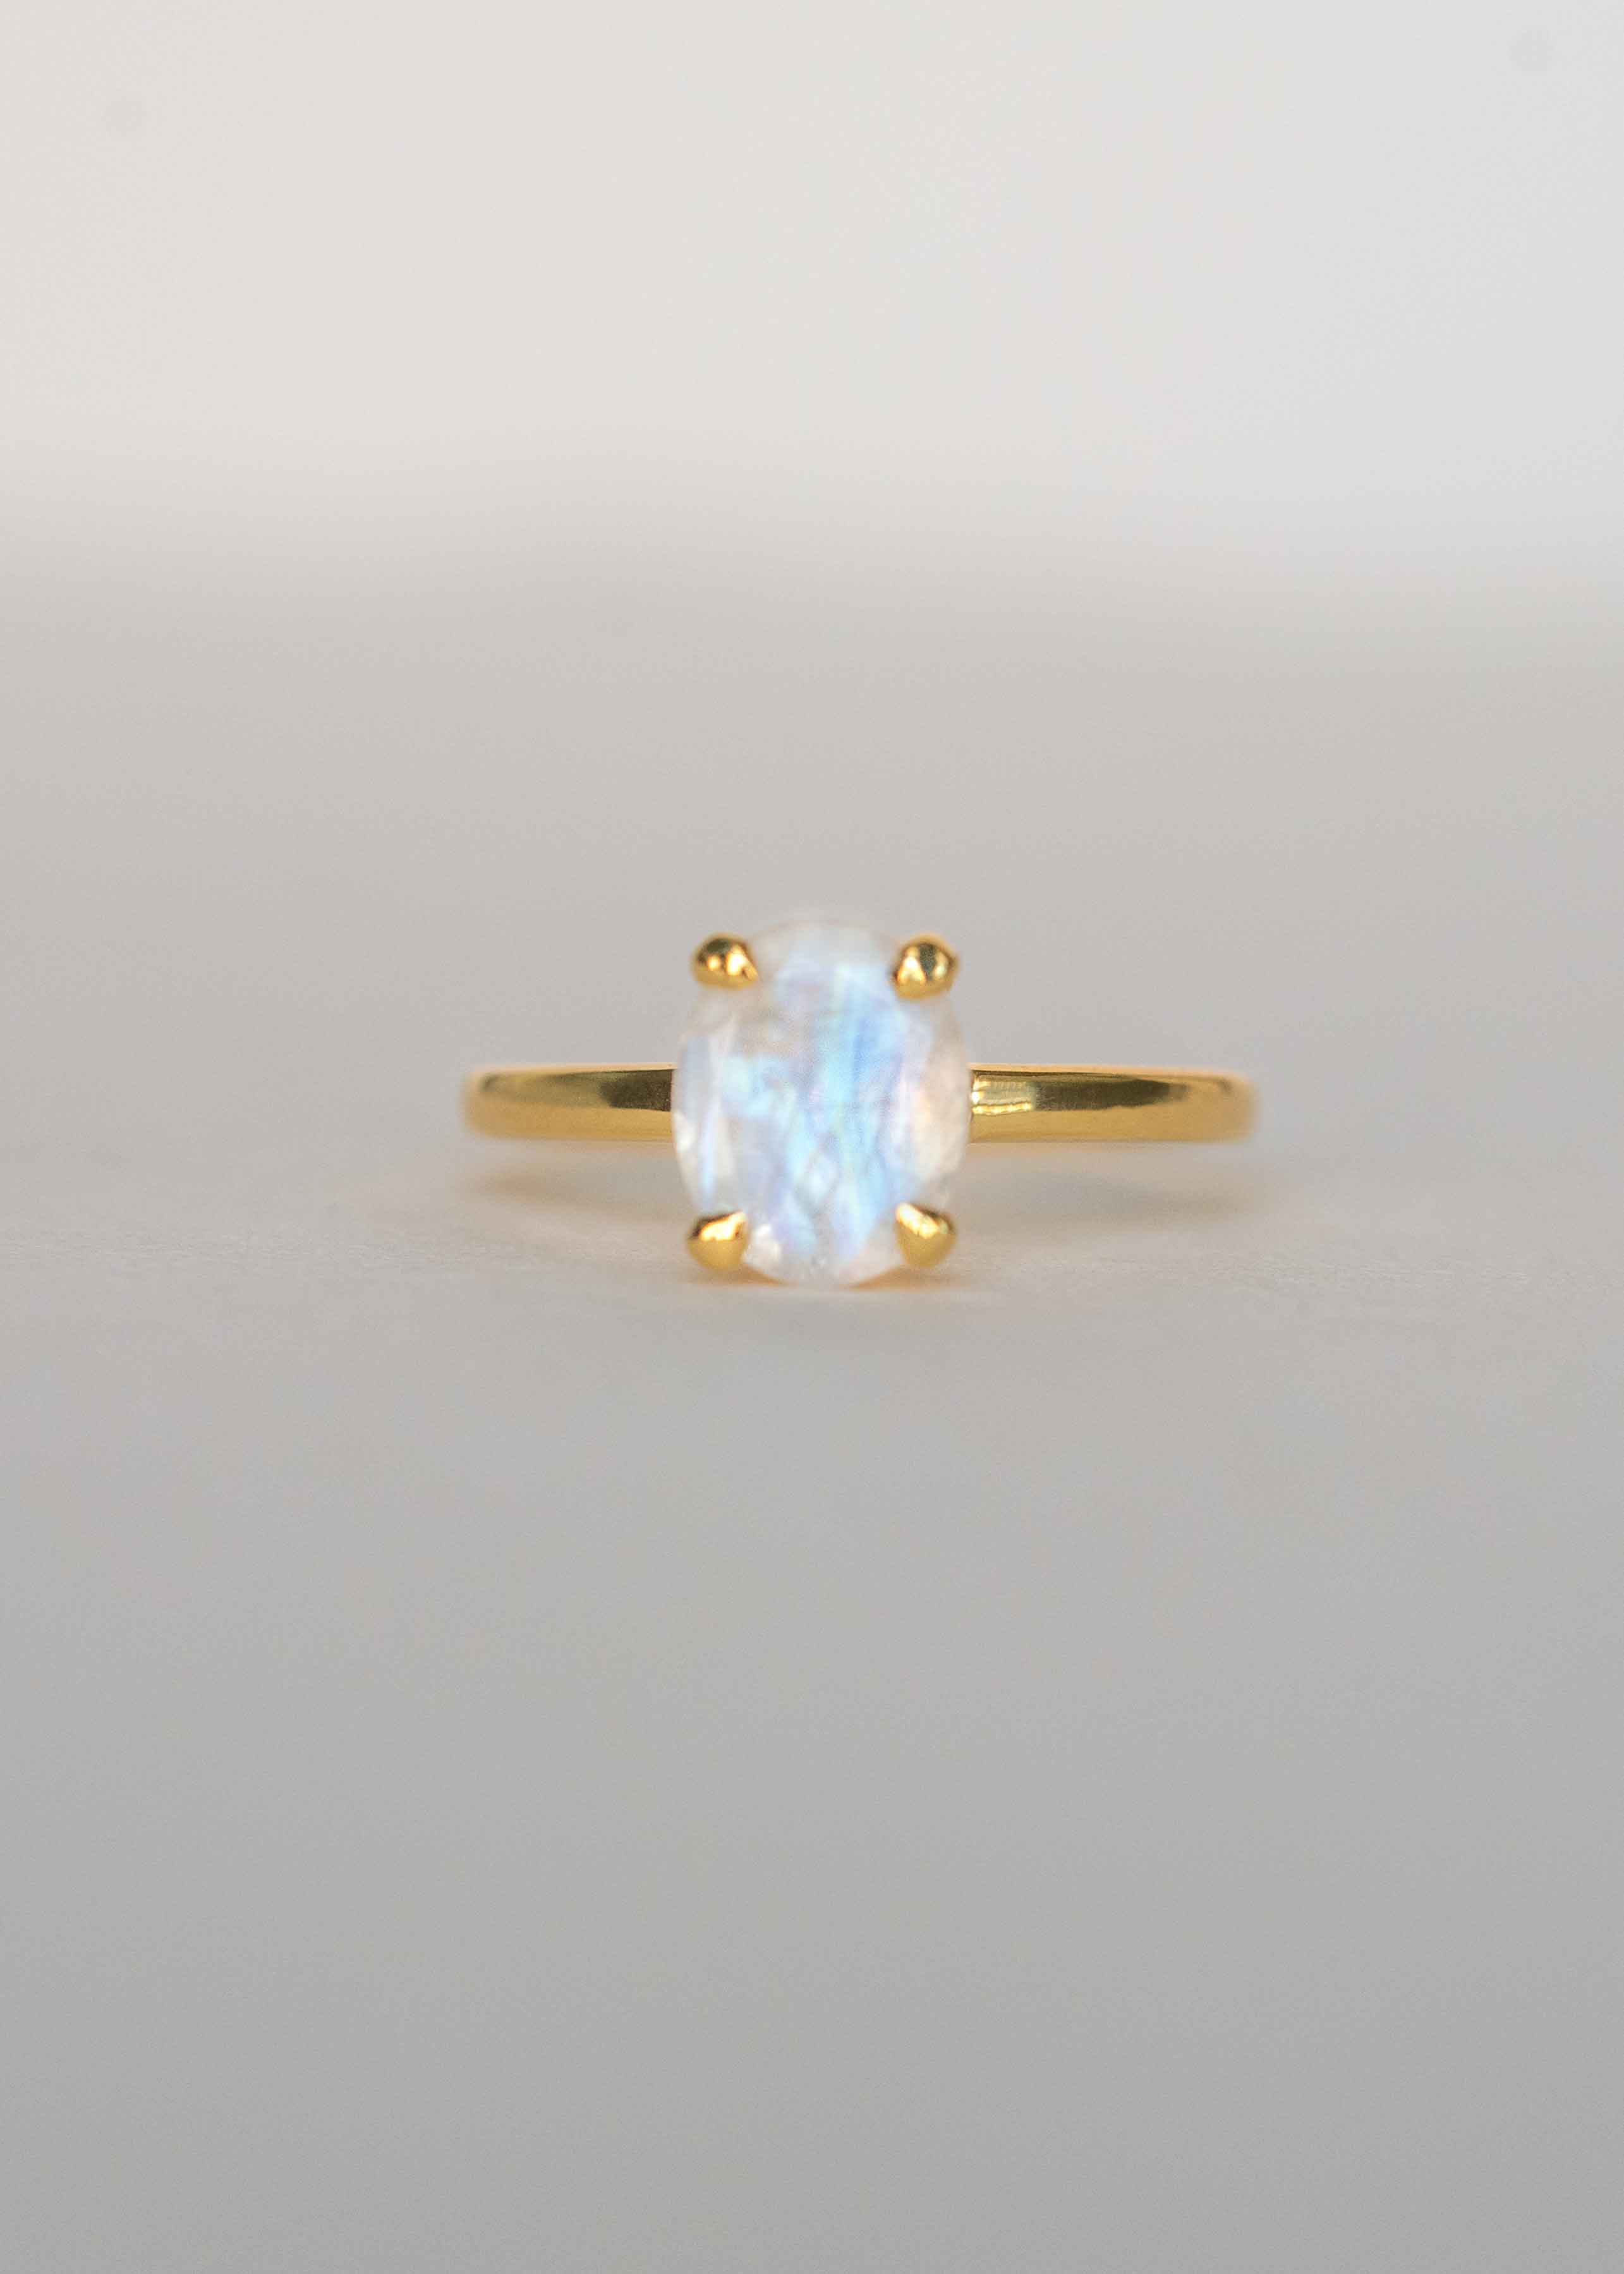 Large Moonstone Ring Sterling Gold, Oval Natural Gemstone Engagement Ring for Women